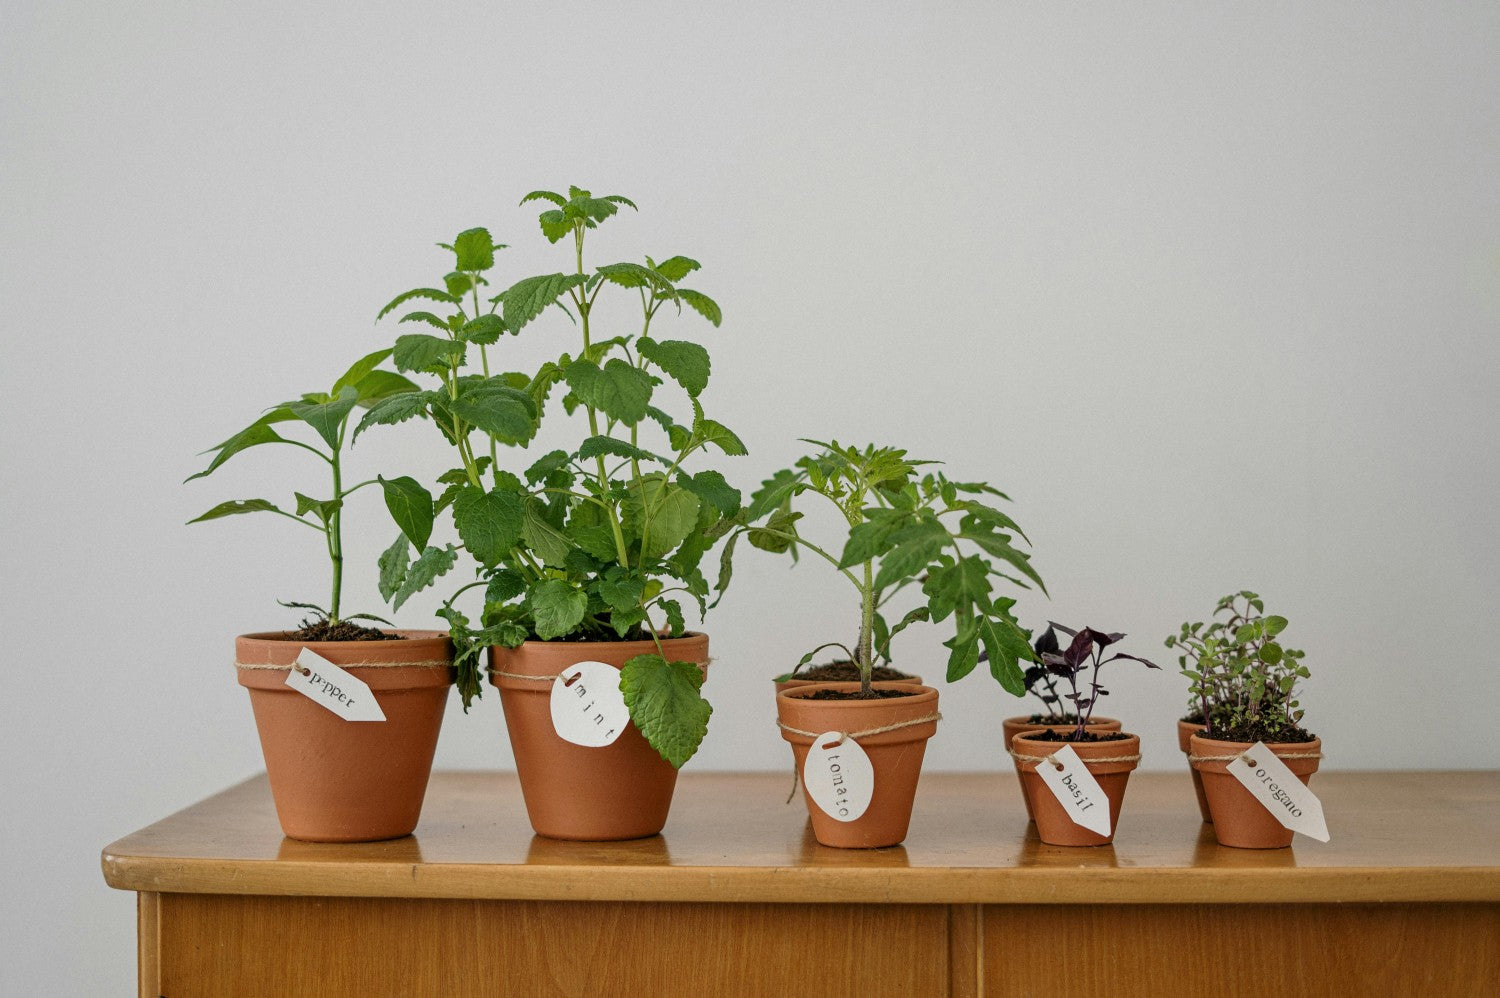 potted herbs arranged on wooden table